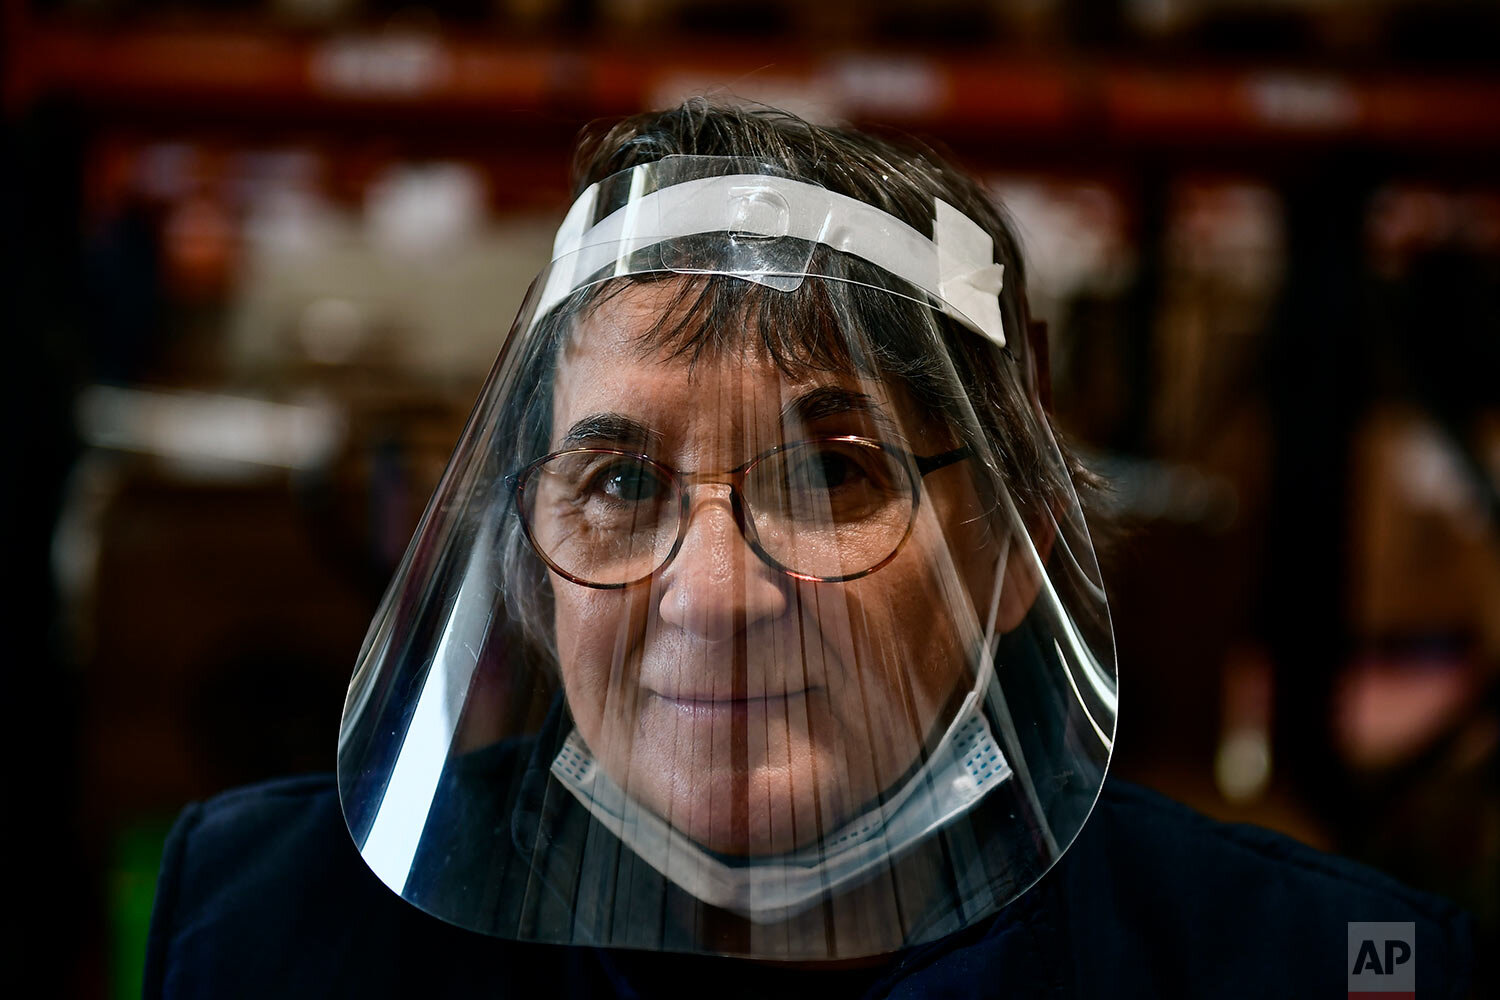  Marisol Villar, a pensioner working as volunteer for a charity foundation, poses for a photograph in Pamplona, northern Spain. (AP Photo/Alvaro Barrientos) 